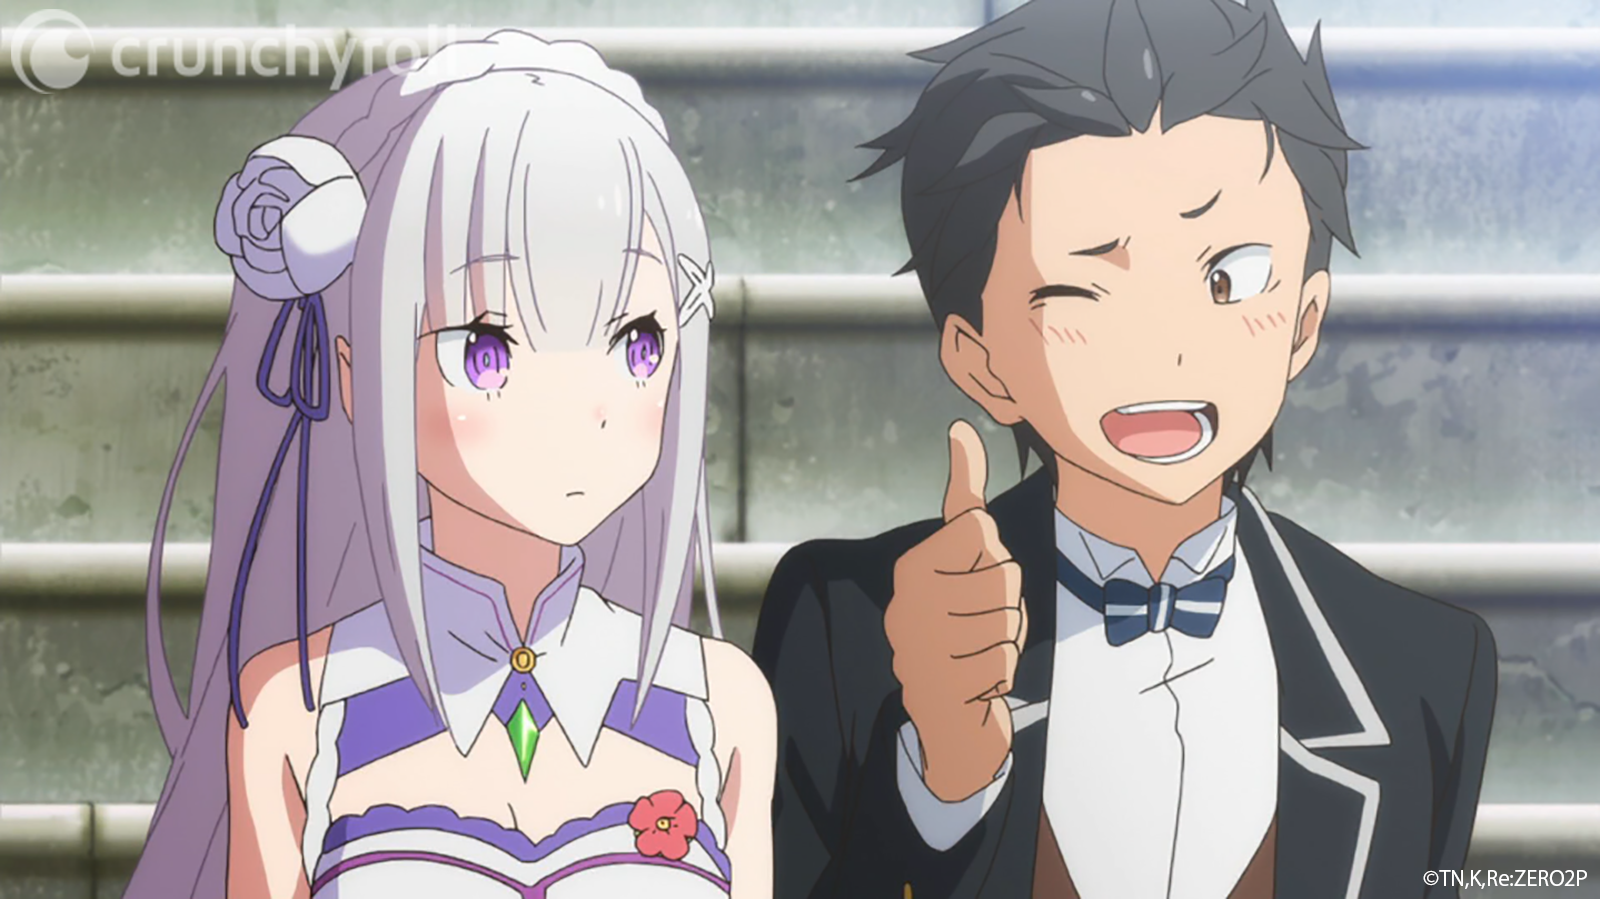 Natsuki Subaru flashes Emilia a wink and a thumb's up in a scene from the Re: ZERO -Starting Life in Another World- TV anime.